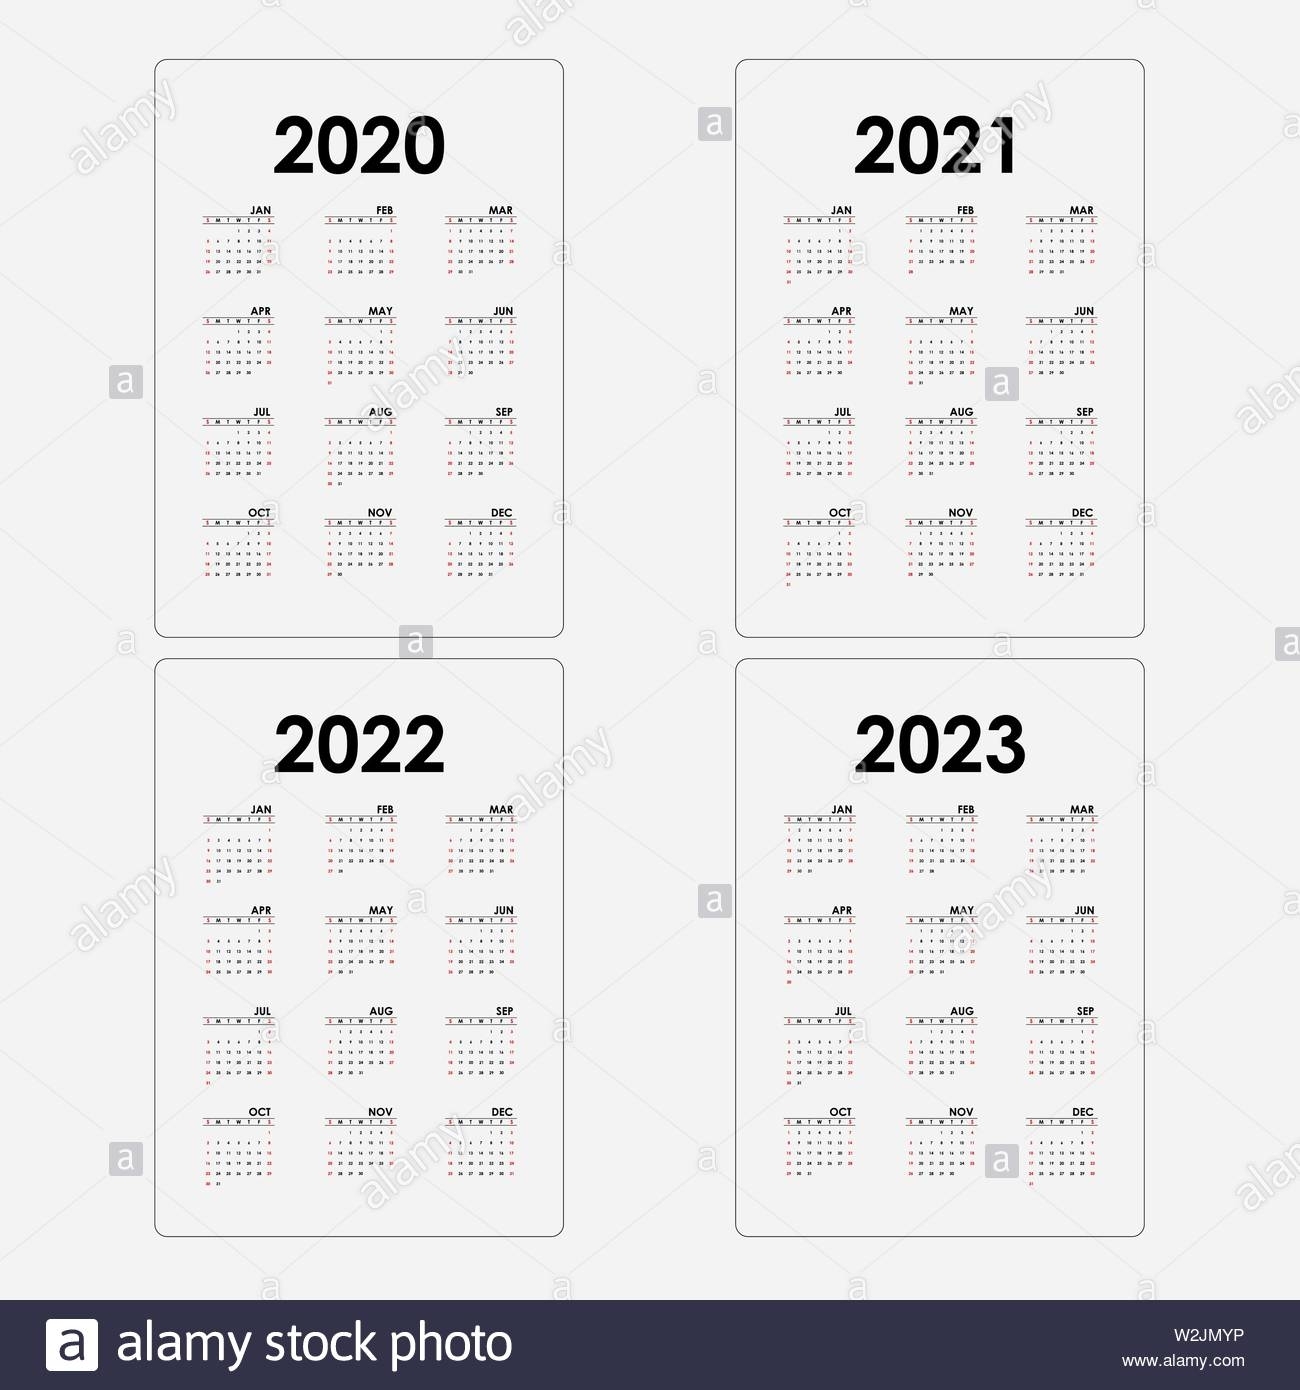 Calendar 2020, 2021,2022 And 2023 Calendar Template.yearly intended for Calendars 2020 2021 2022 2023